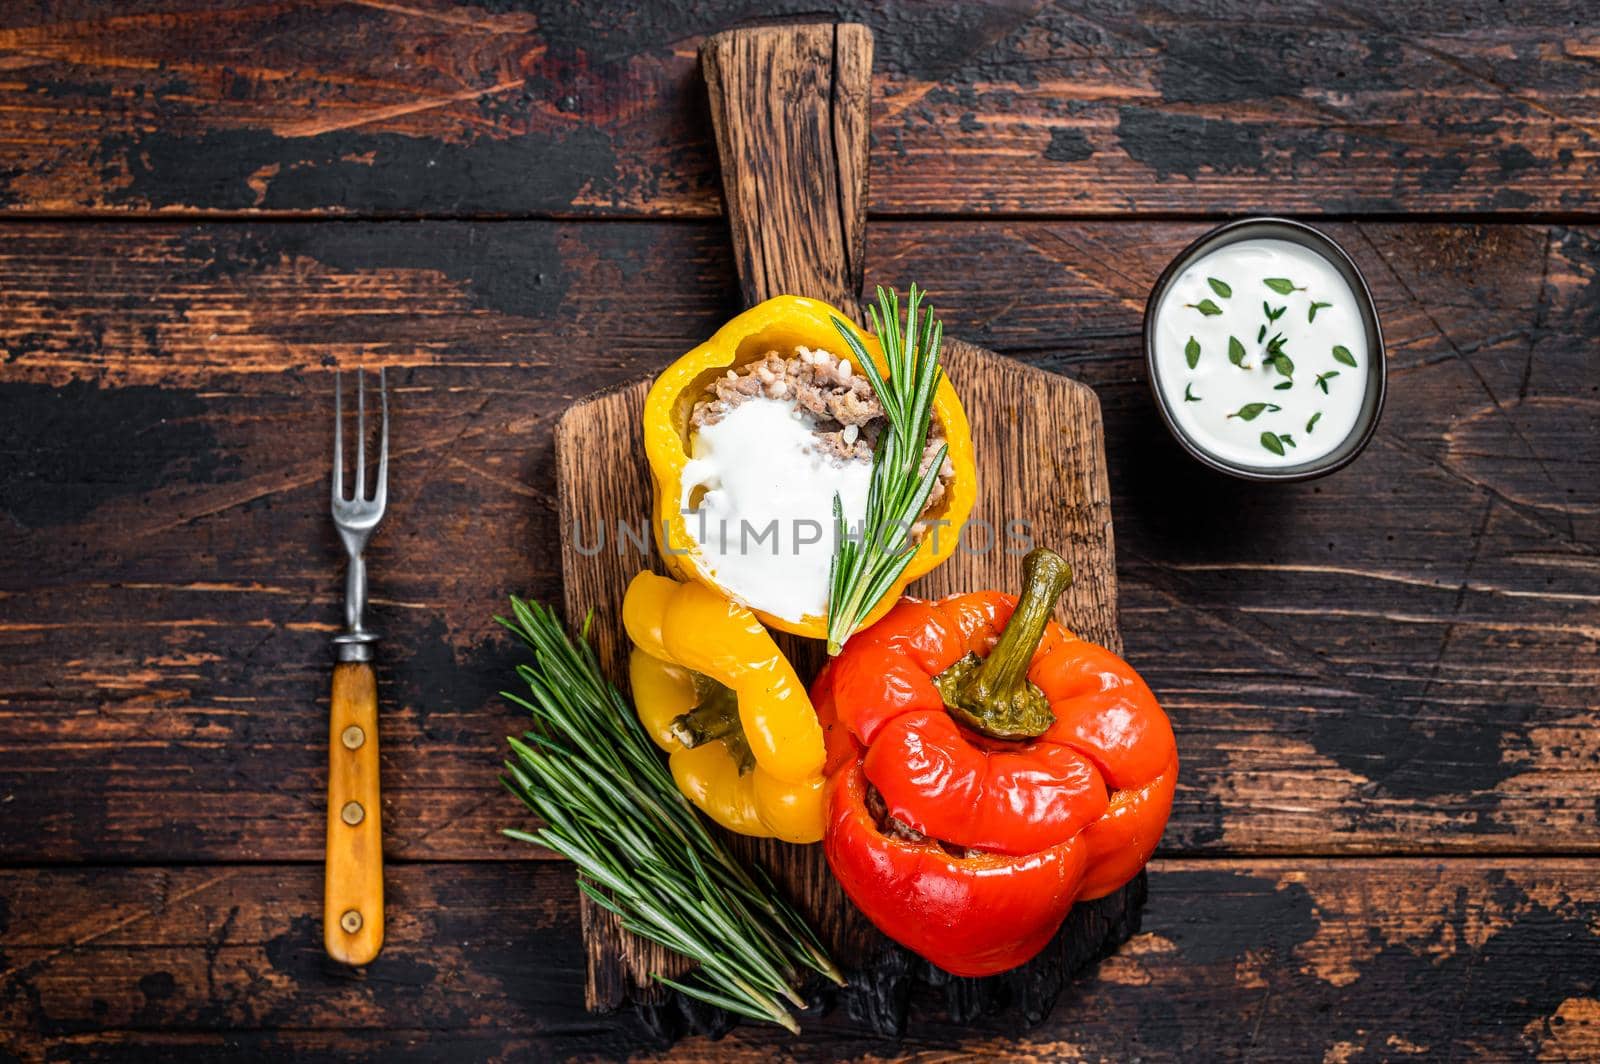 Roast bell pepper stuffed with beef meat, rice and vegetables on a wooden board. Dark wooden background. Top view by Composter